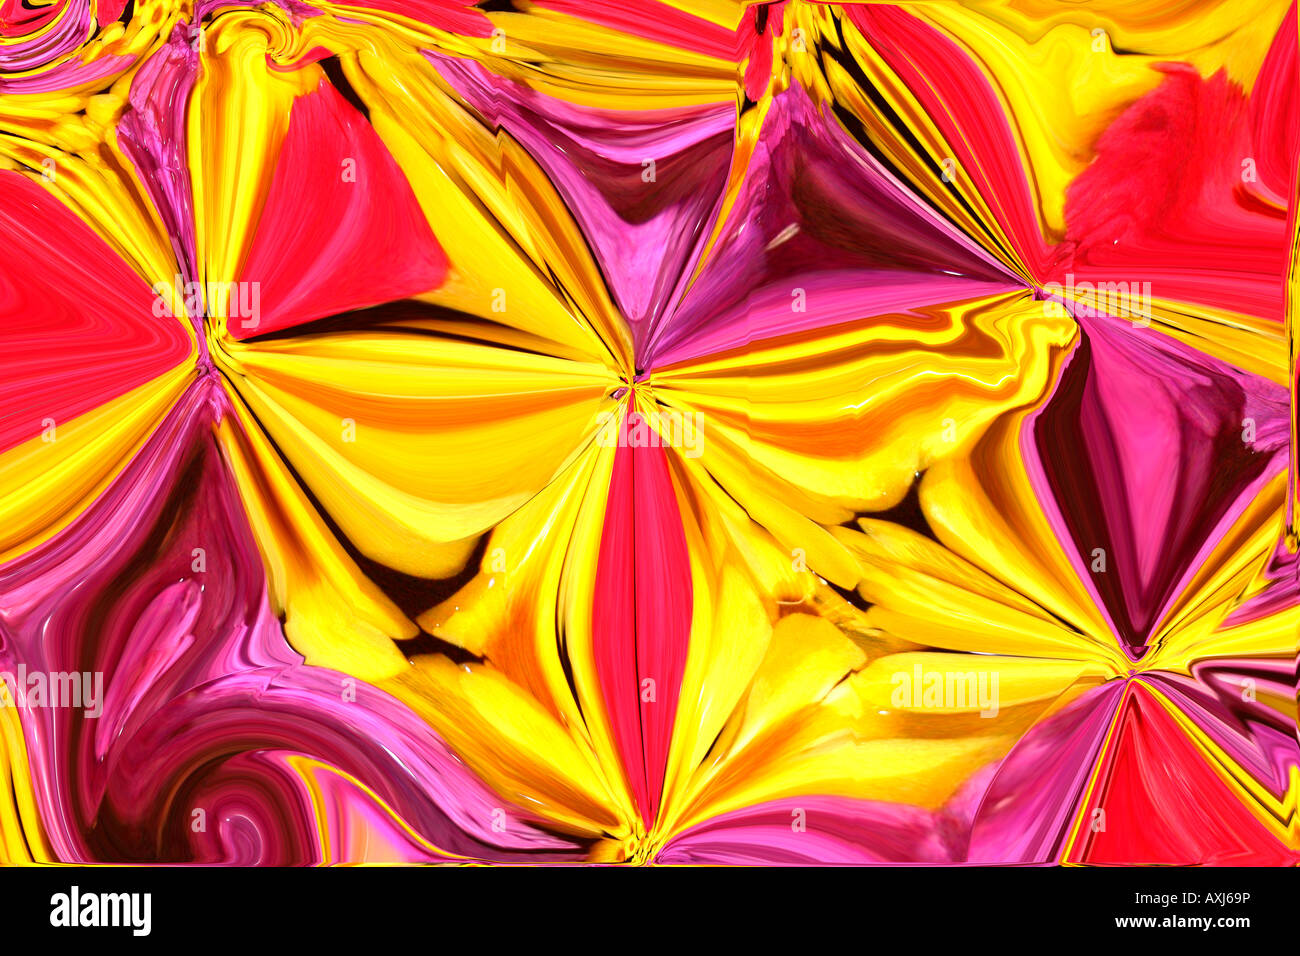 Satinscapes - computer art of smooth velvety vivid vibrant purple red pink yellow gold fabric with floral design in multi-color Stock Photo